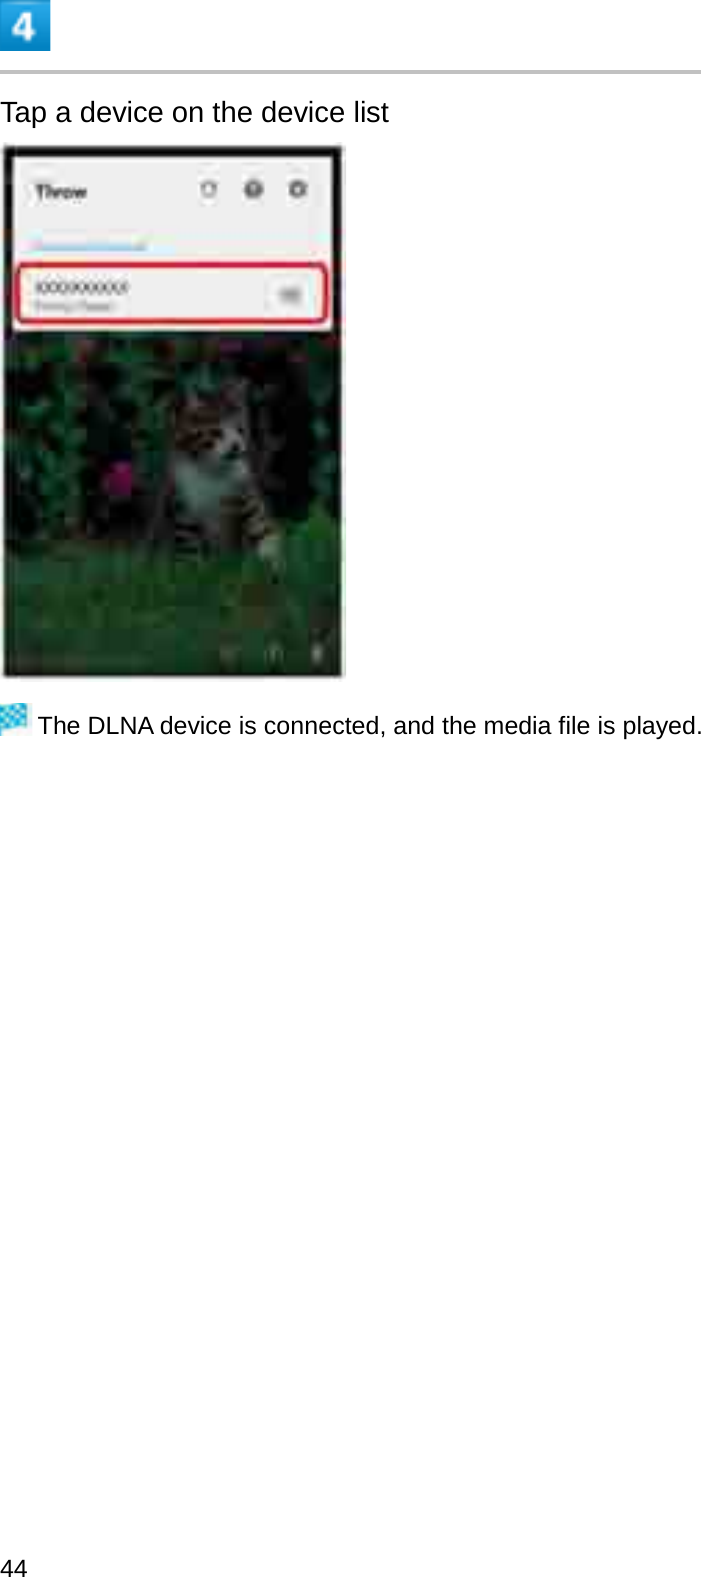 Tap a device on the device listThe DLNA device is connected, and the media file is played.44